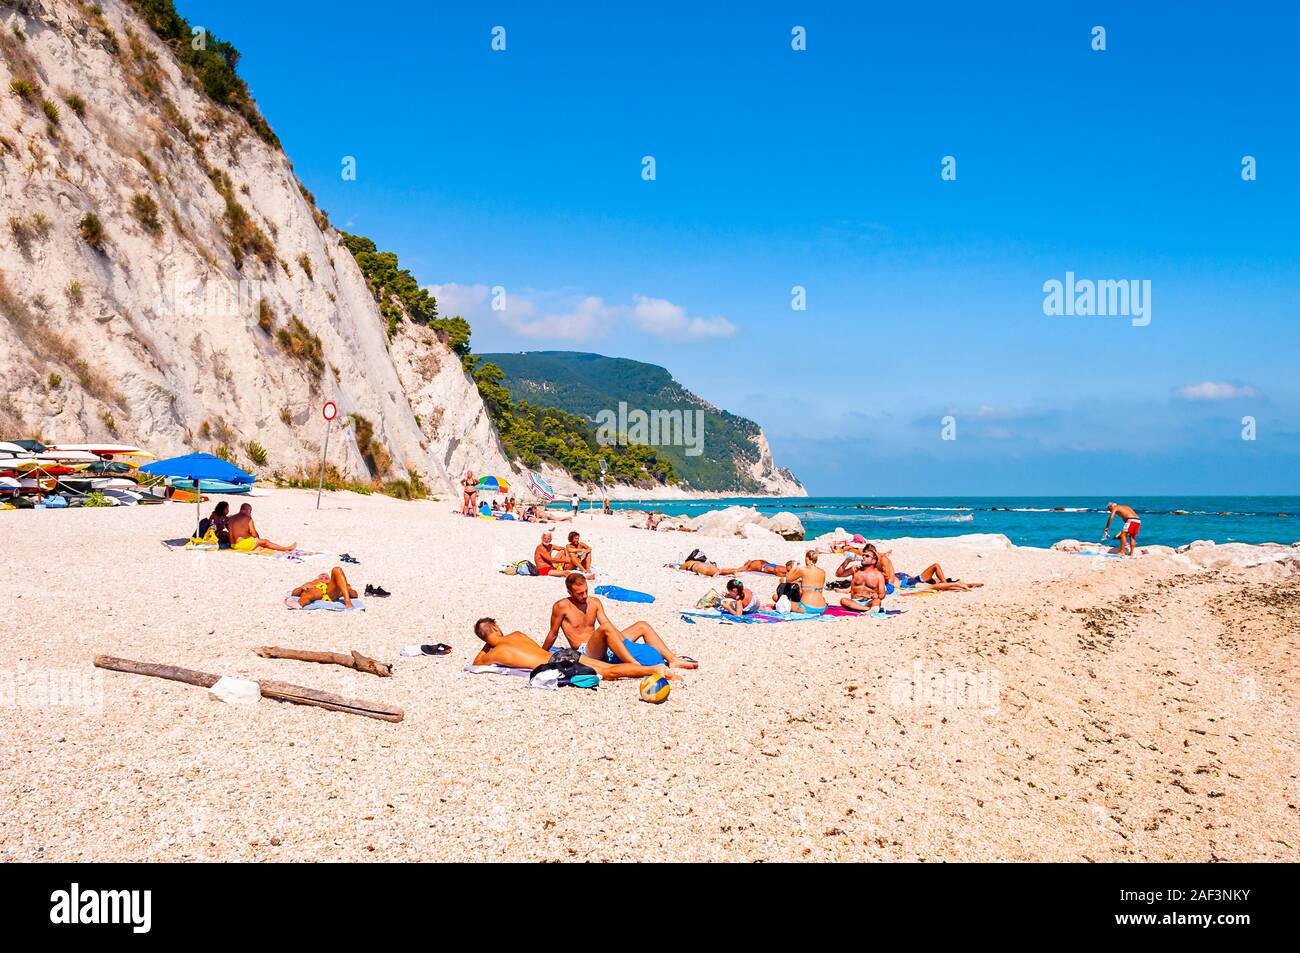 Spiaggia del Frate, Numana, Ancona, Marche, Italy - September 11, 2019: People resting on amazing white pebbles beach surrounded by high massive white Stock Photo